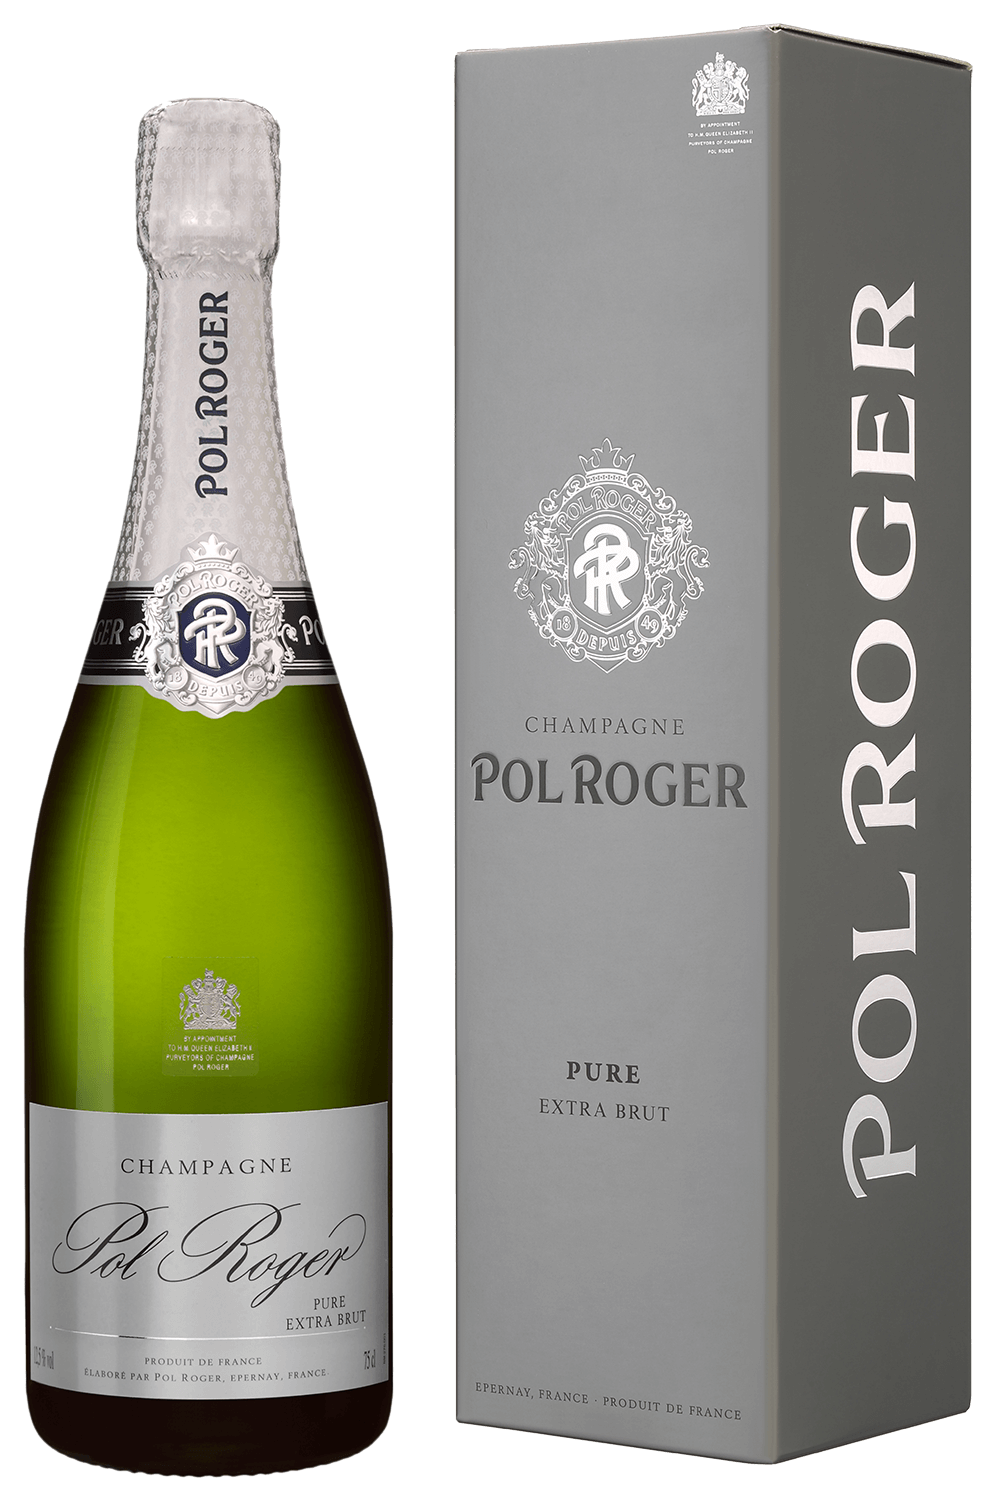 Pol Roger Pure Extra Brut Champagne AOC (gift box) rosé de meunier extra brut champagne aoс laherte freres gift box